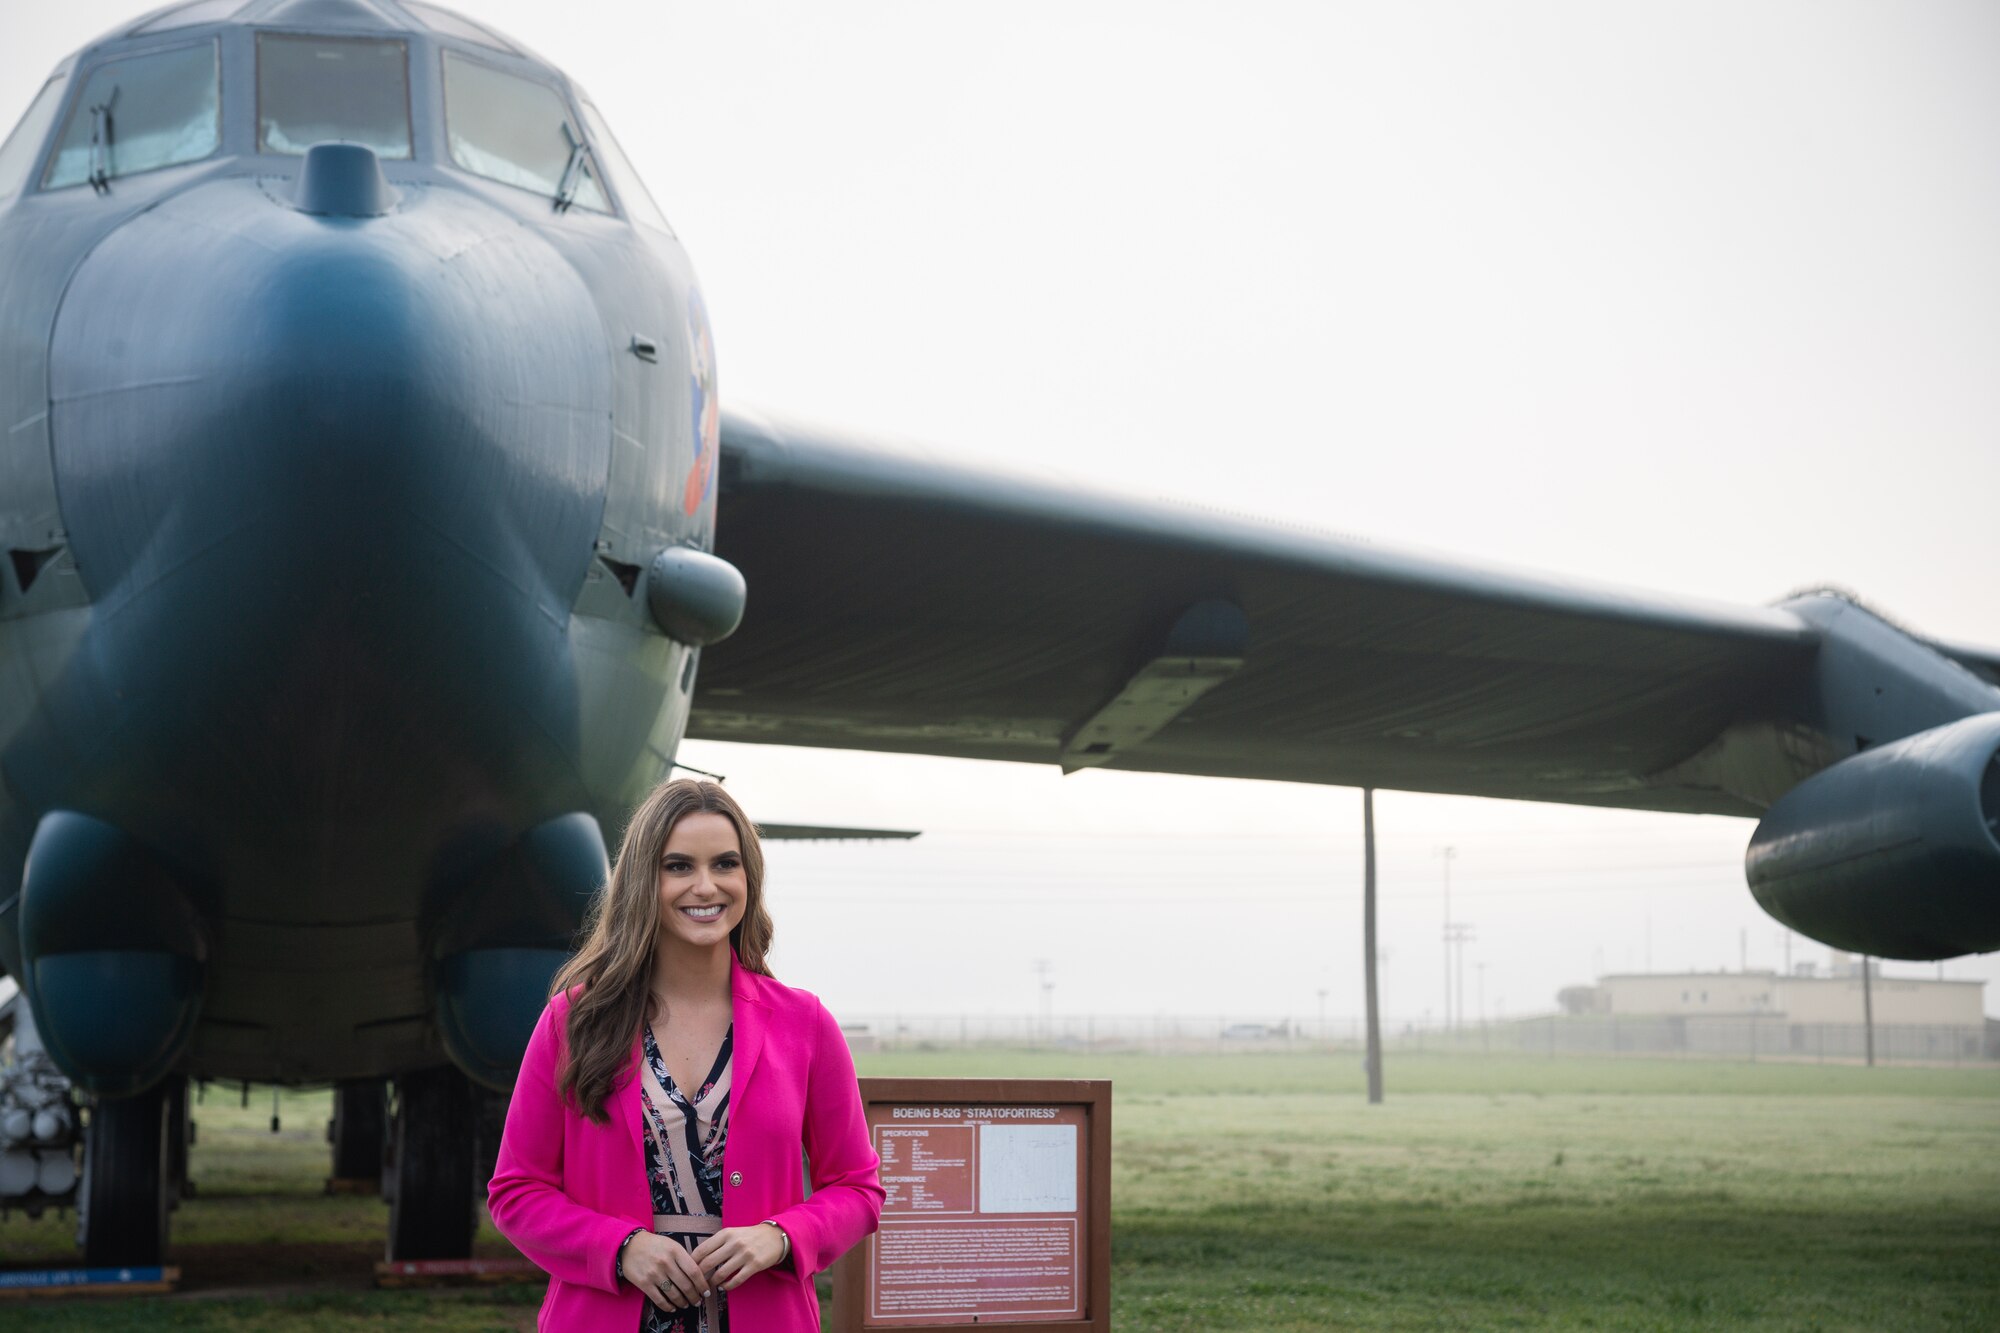 Camille Schrier, Miss America 2020, poses for a photo in front of a B-52G Stratofortress static display at the Global Power Museum at Barksdale Air Force Base, Louisiana, March 24, 2021.